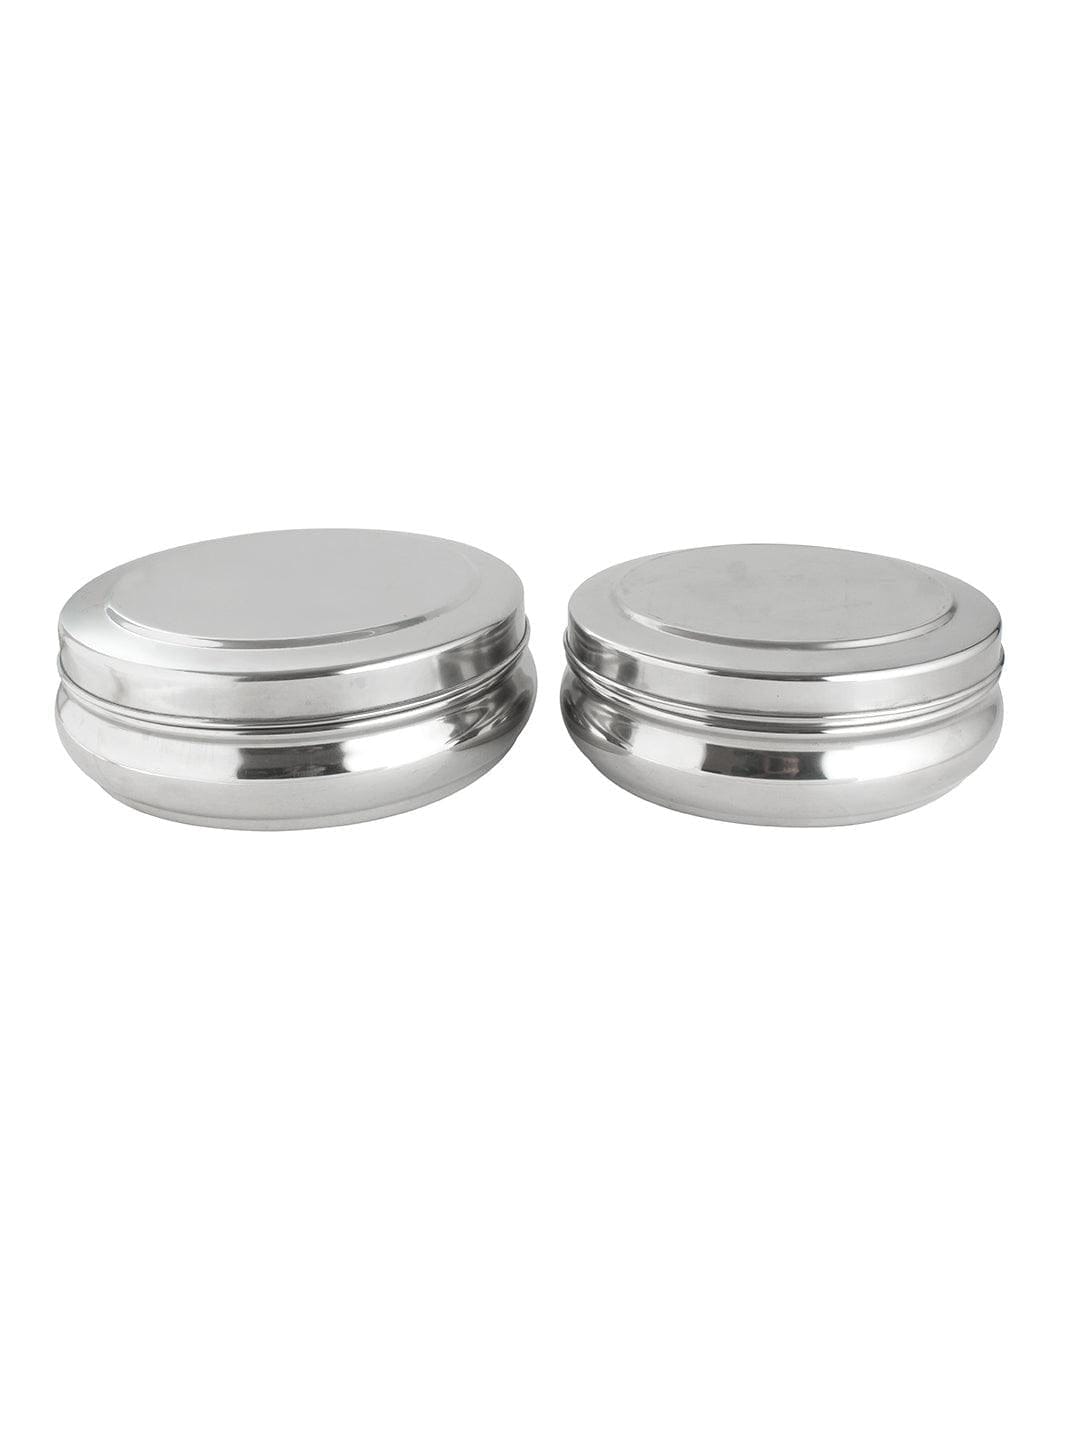 Smartserve Stainless Steel Tomato Dabba, Set of 2 | Food Container